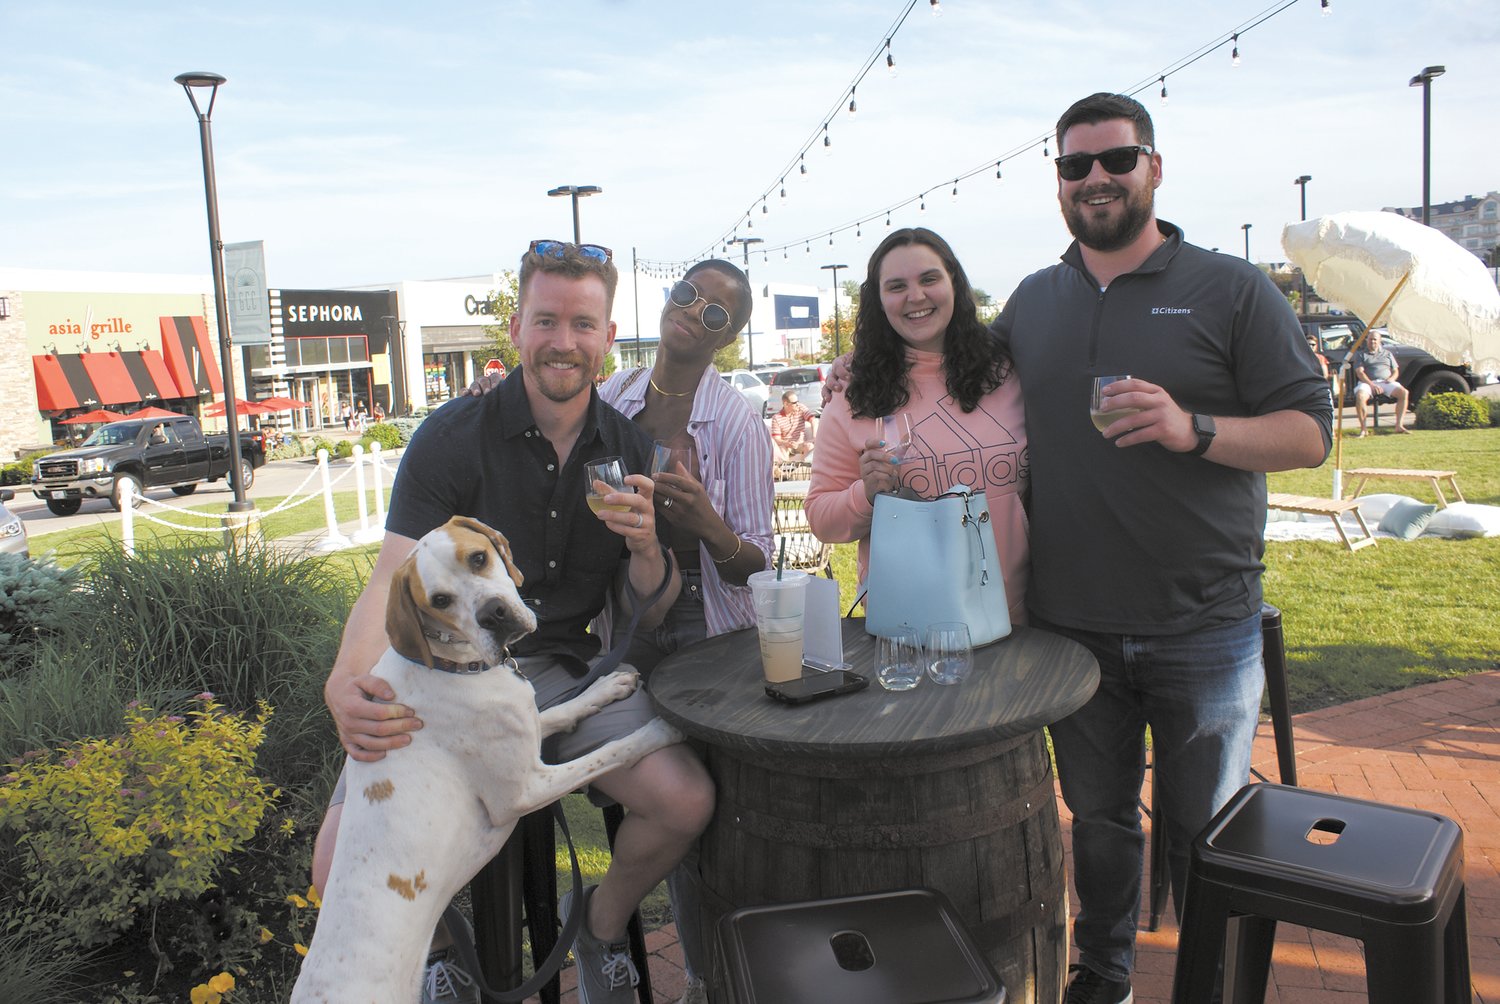 FRIENDS GATHER: Enjoying their evening during Garden City Sips were Walter, a 1 year old English Pointer, his parents Nick and Mika Loens and their friends Meaghan Dubois and Justin Moran. (Photo by Steve Popiel)